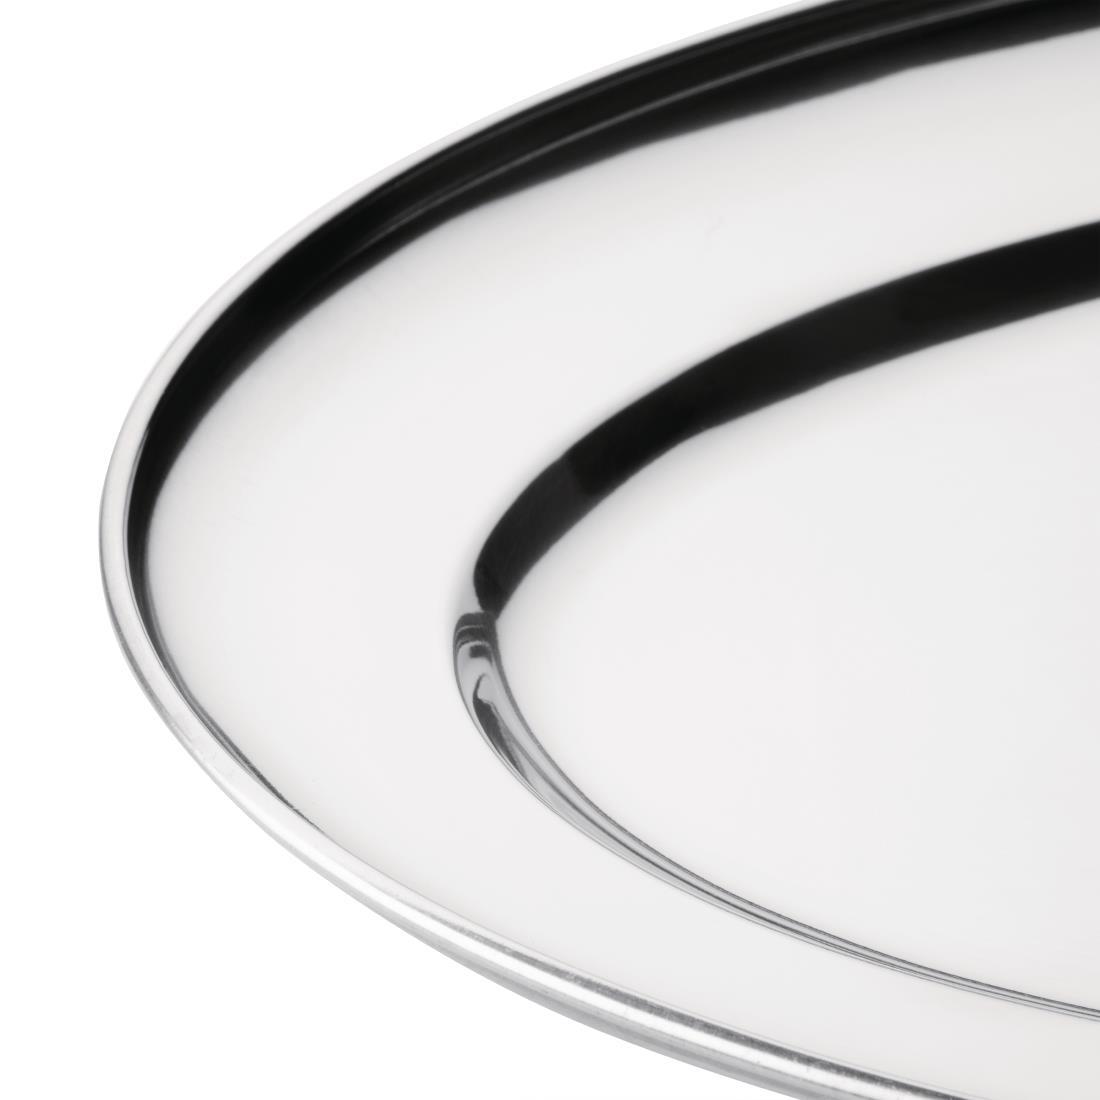 Olympia Stainless Steel Oval Serving Tray 350mm - K364  - 6